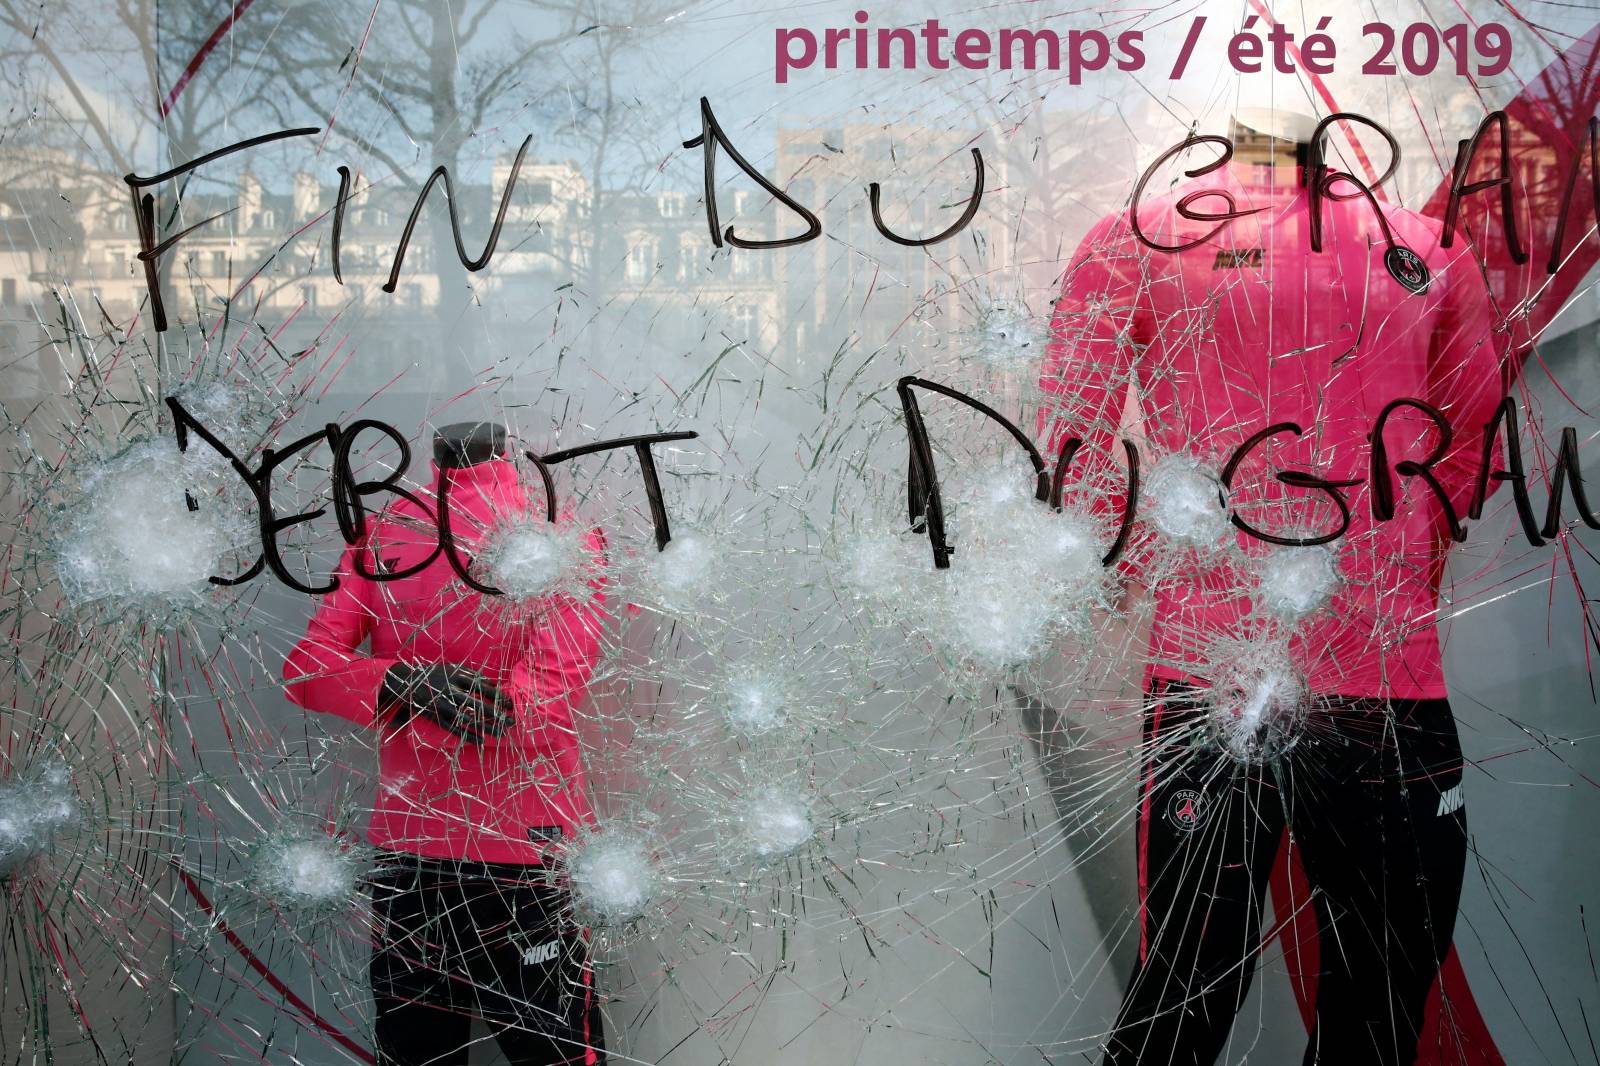 The damaged window of the Paris Saint-Germain shop is pictured on the Champs-Elysees after a demonstration by the "yellow vests" movement in Paris